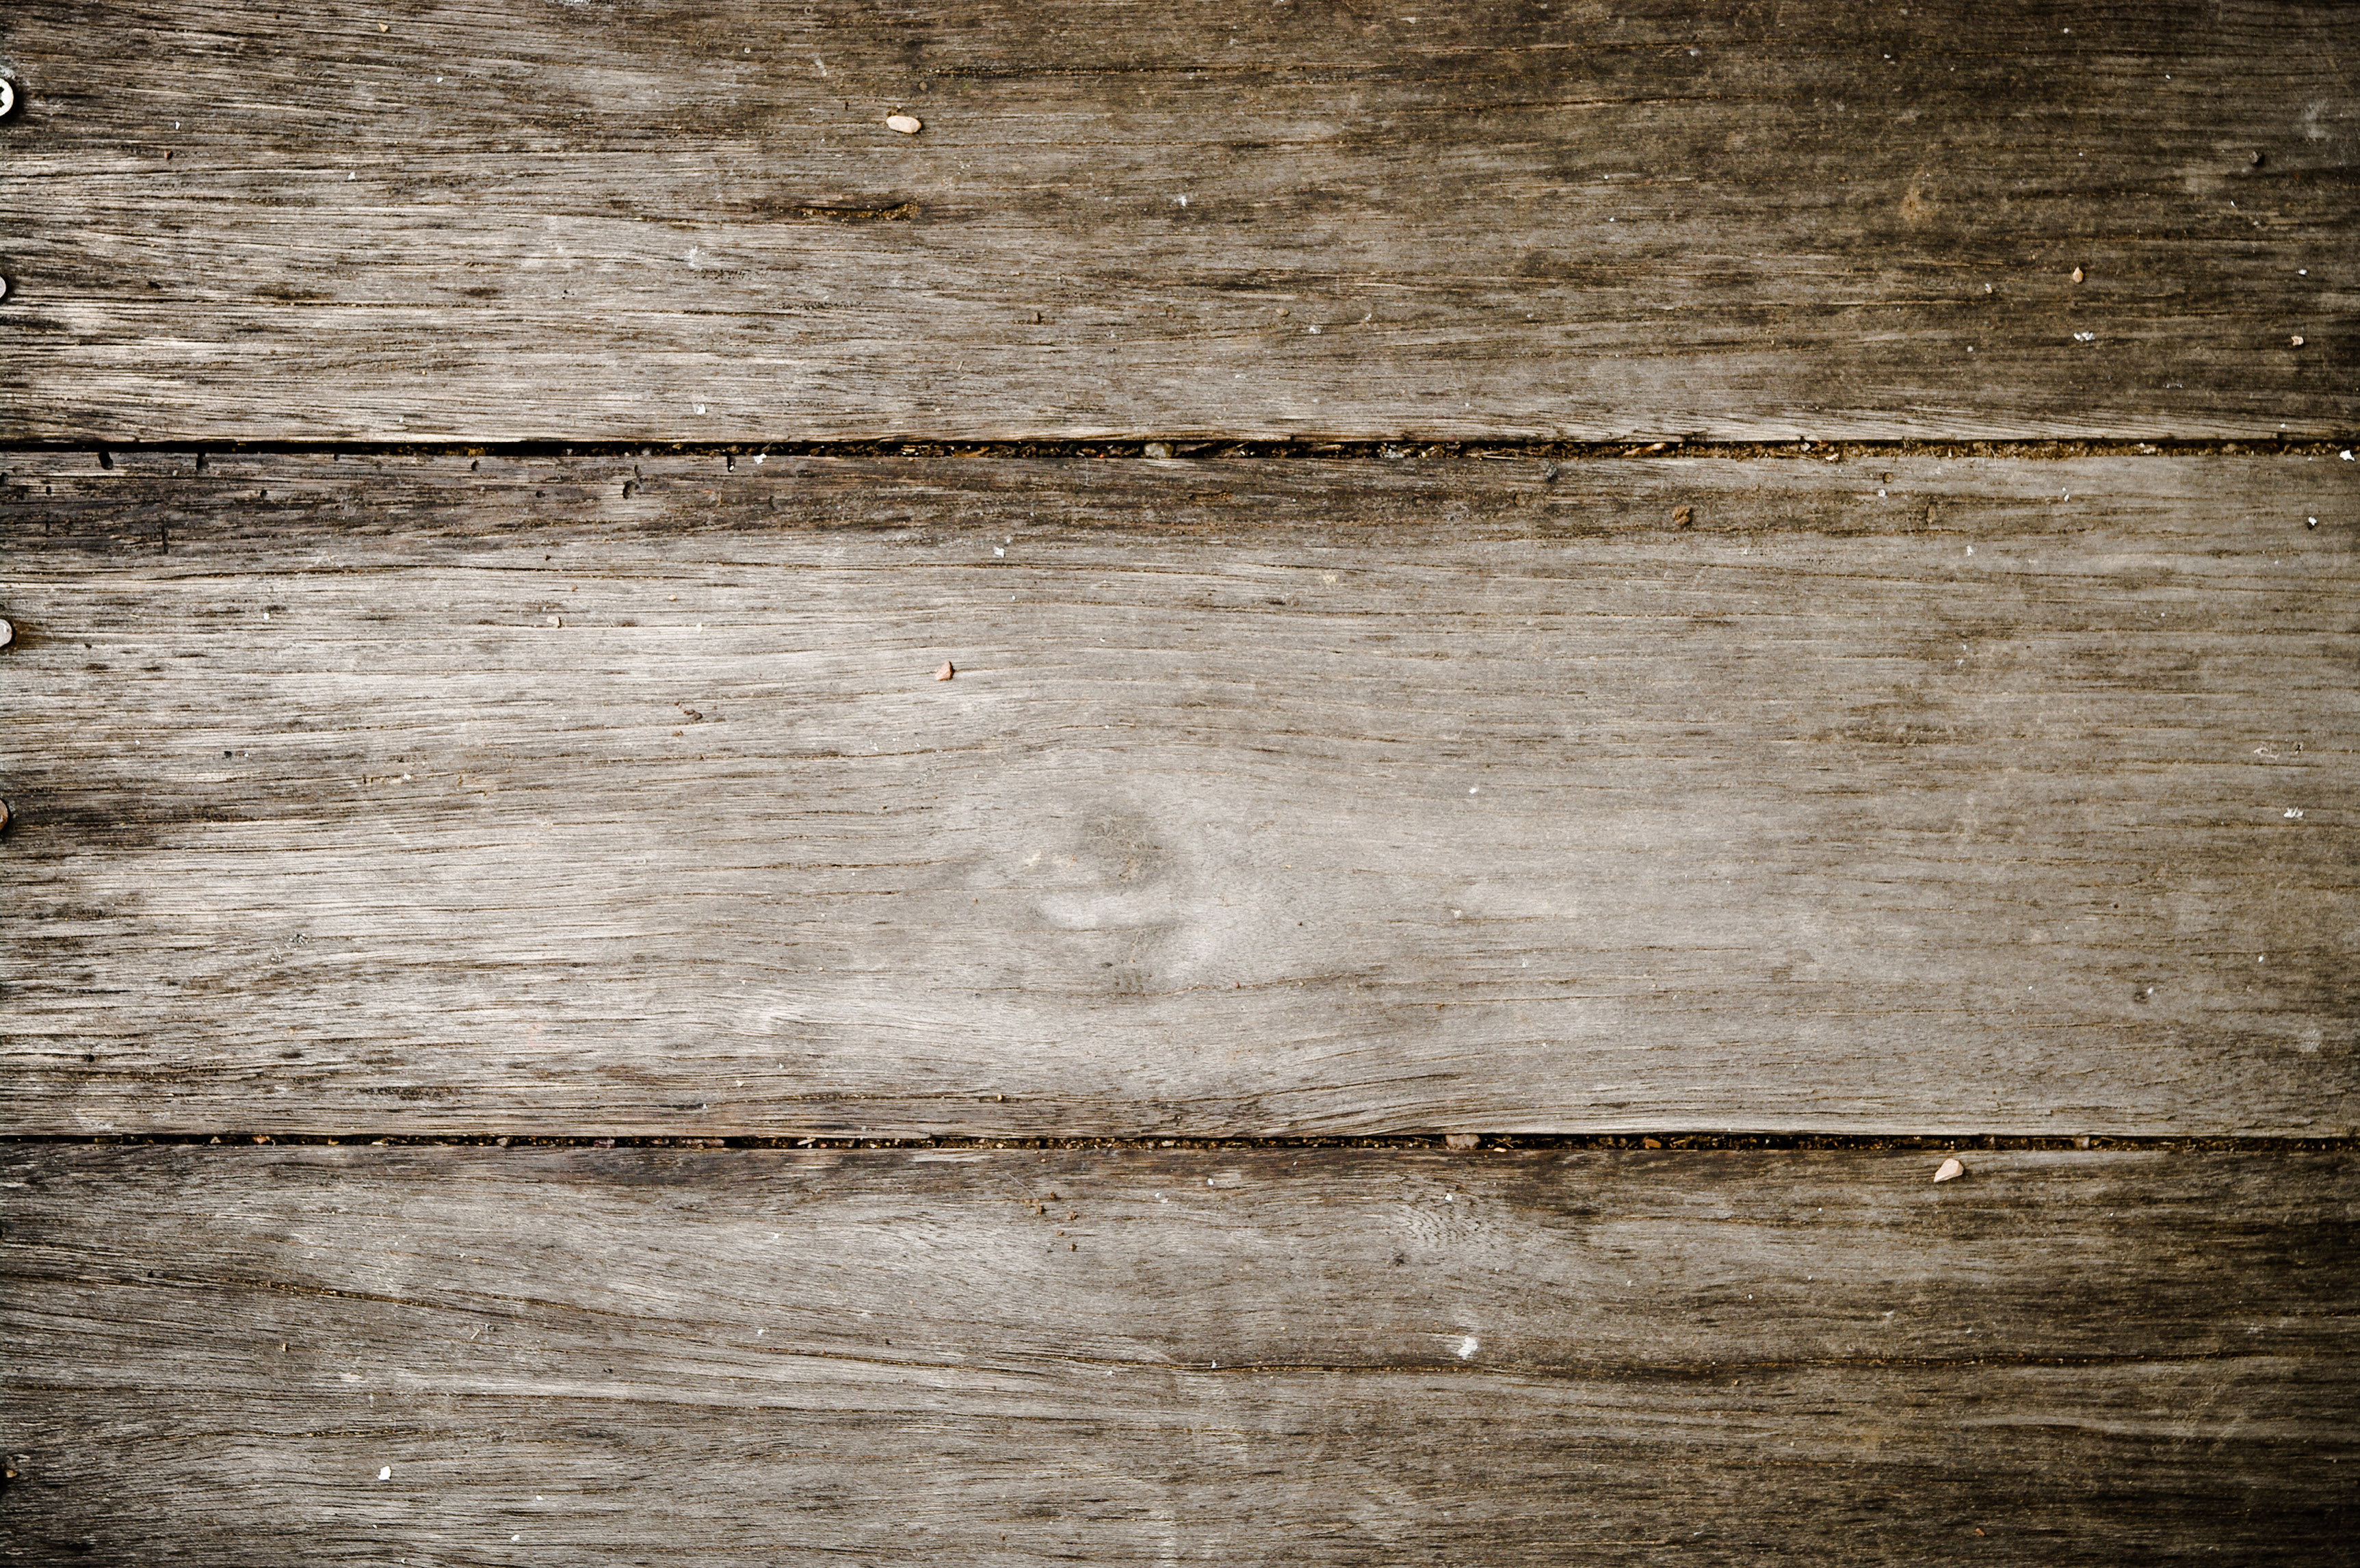 Wooden Background Texture Photo Of Old Grungy Wood